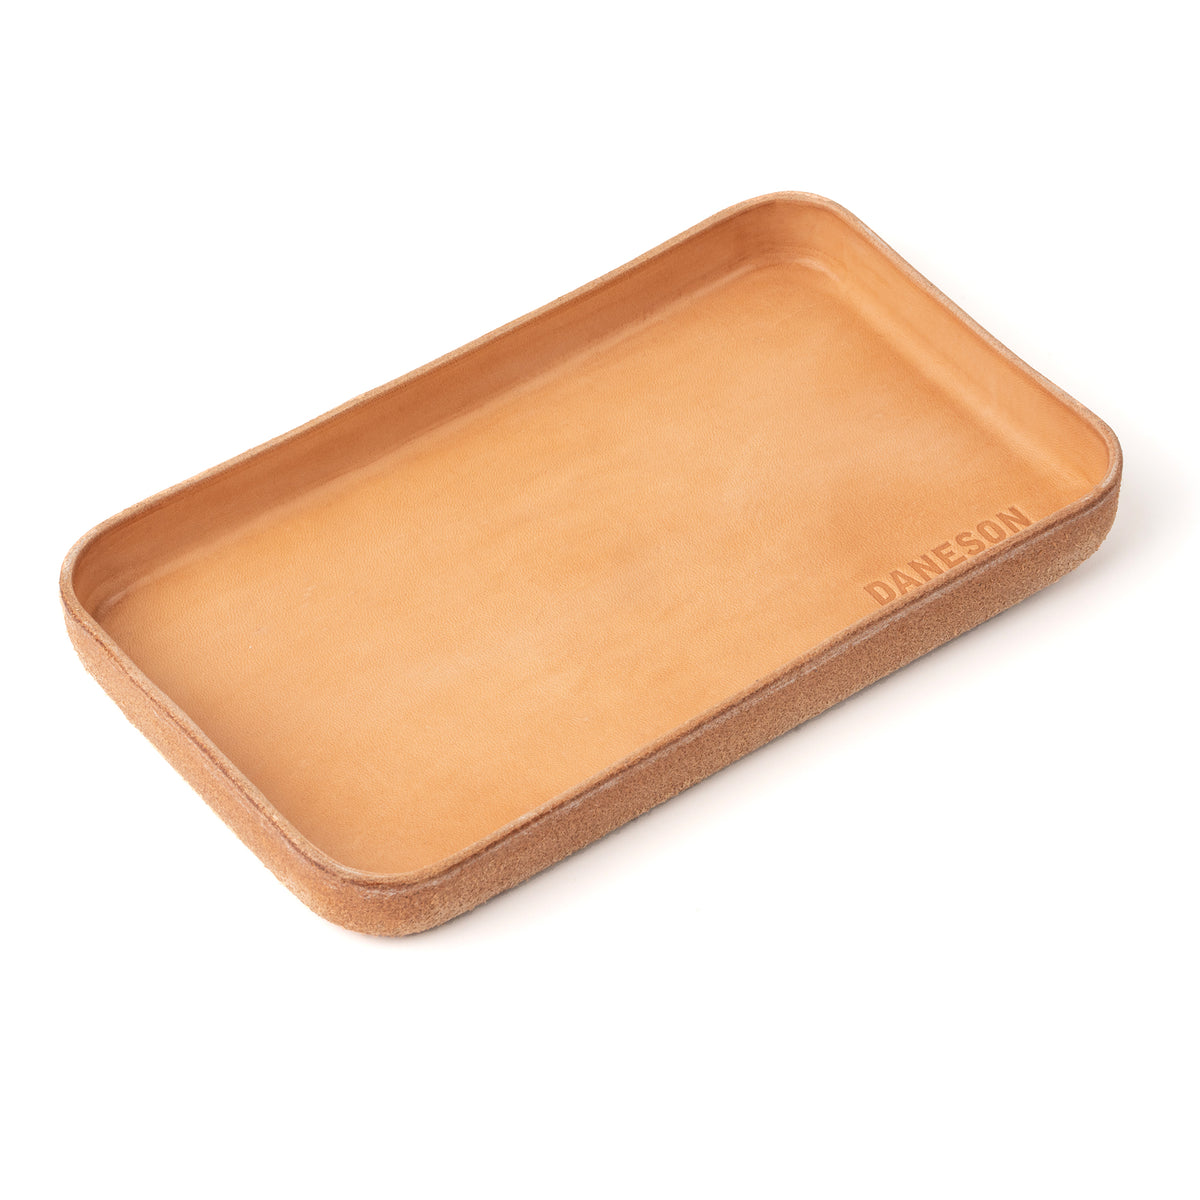 Daneson Leather Valey Tray Natural